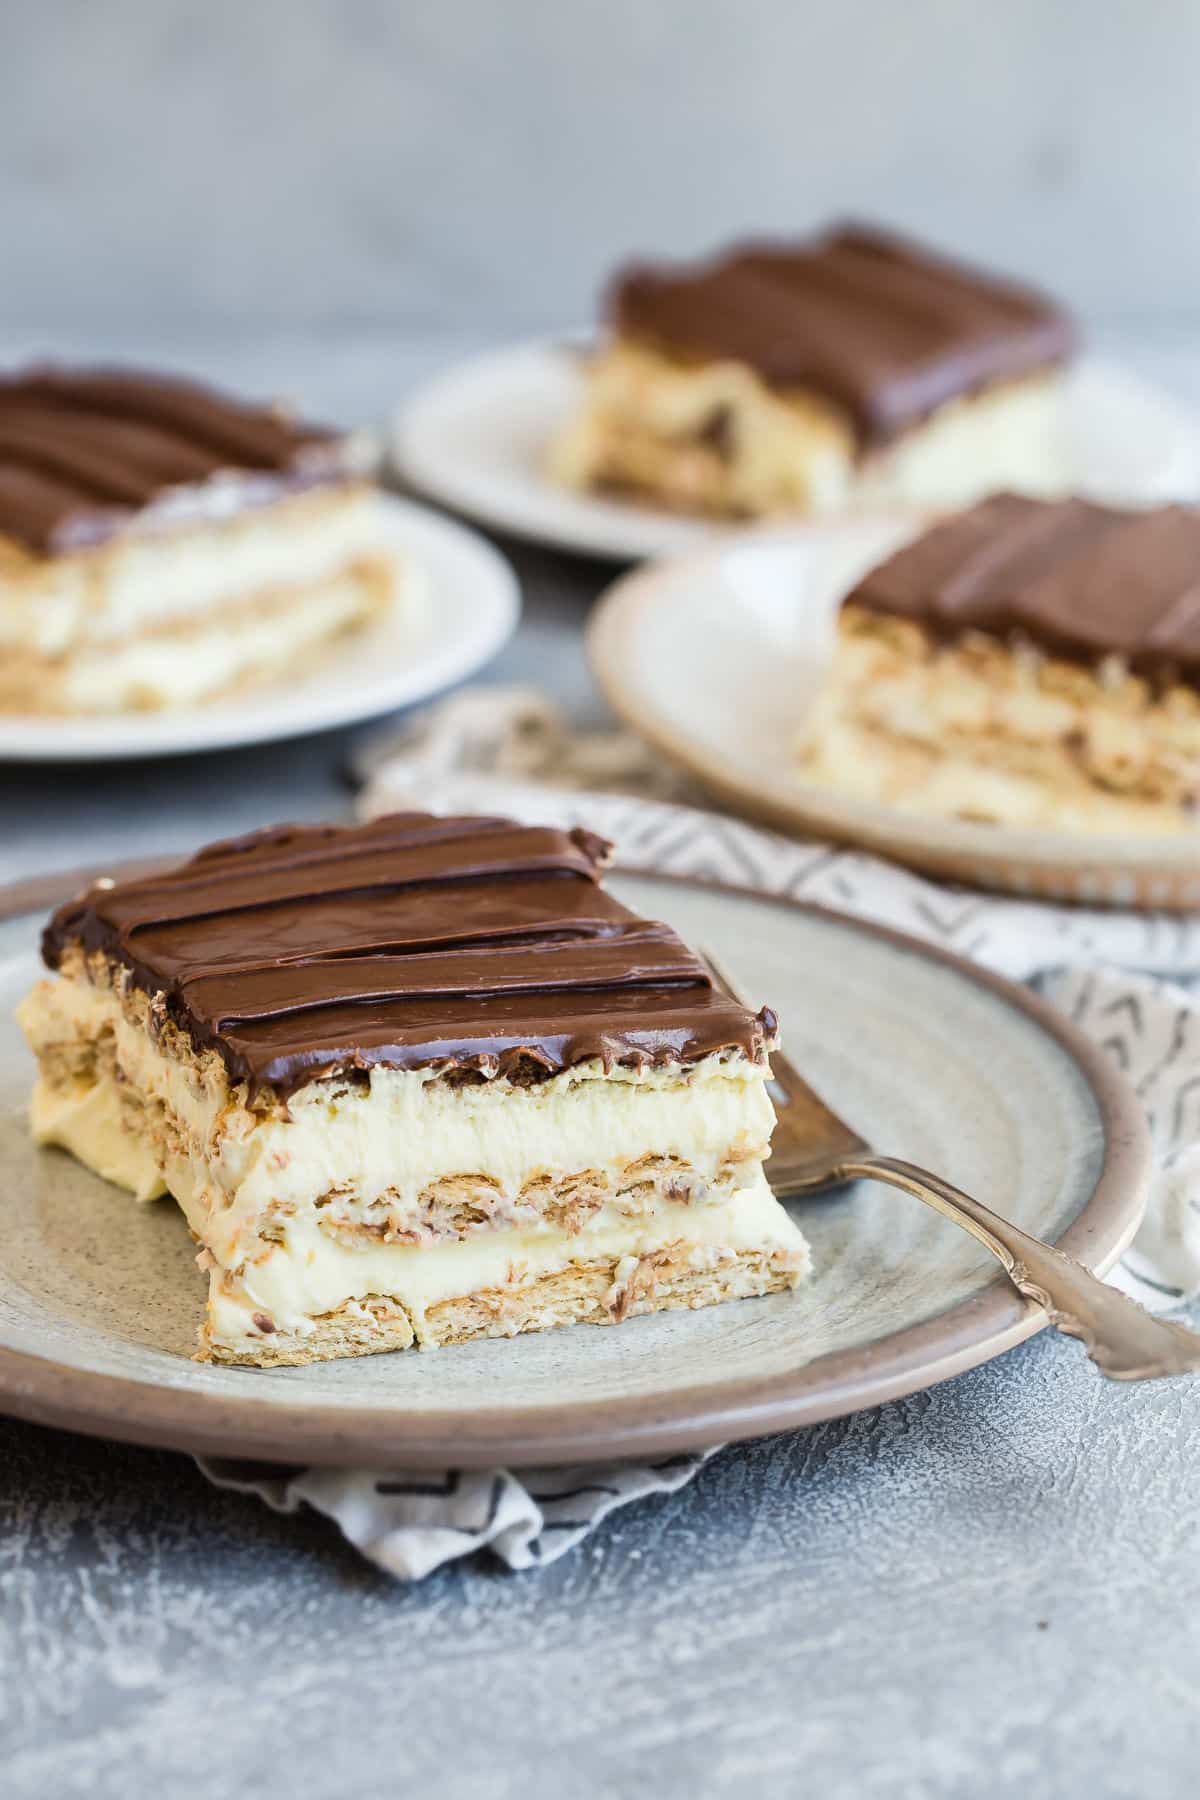 Slices of no-bake Chocolate Eclair Cake on white plates with forks.